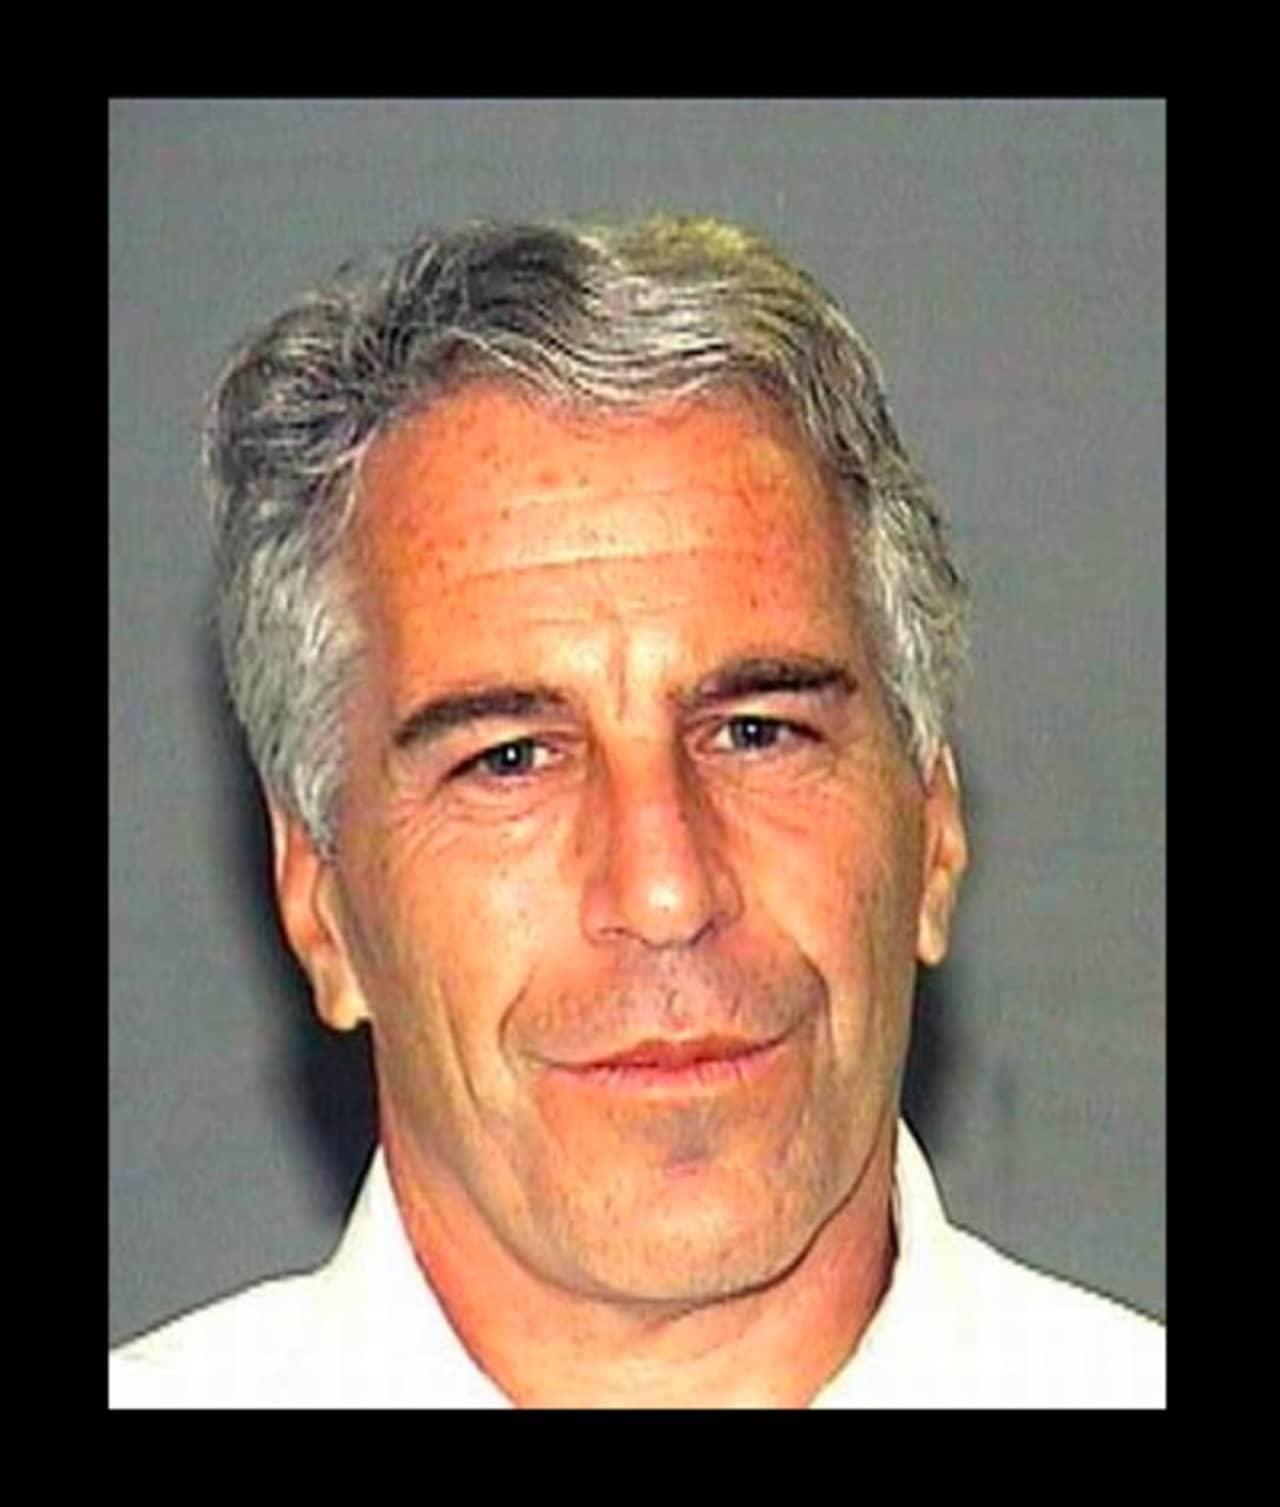 Jeffrey Epstein was arrested on the Teterboro Airport tarmac, multiple reports say.